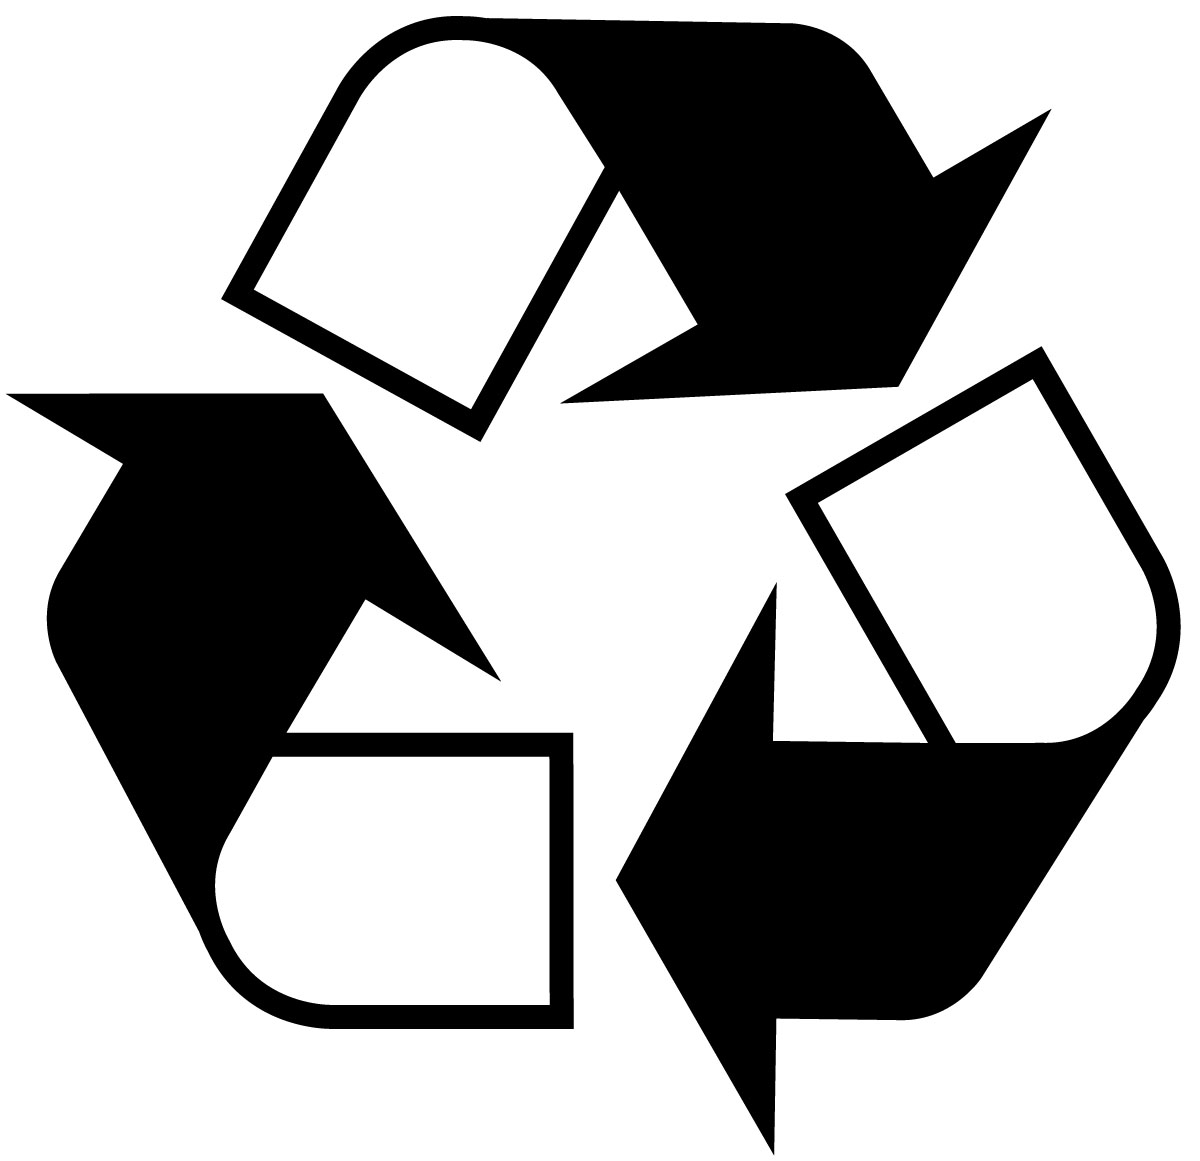 Image Of Recycle Symbol